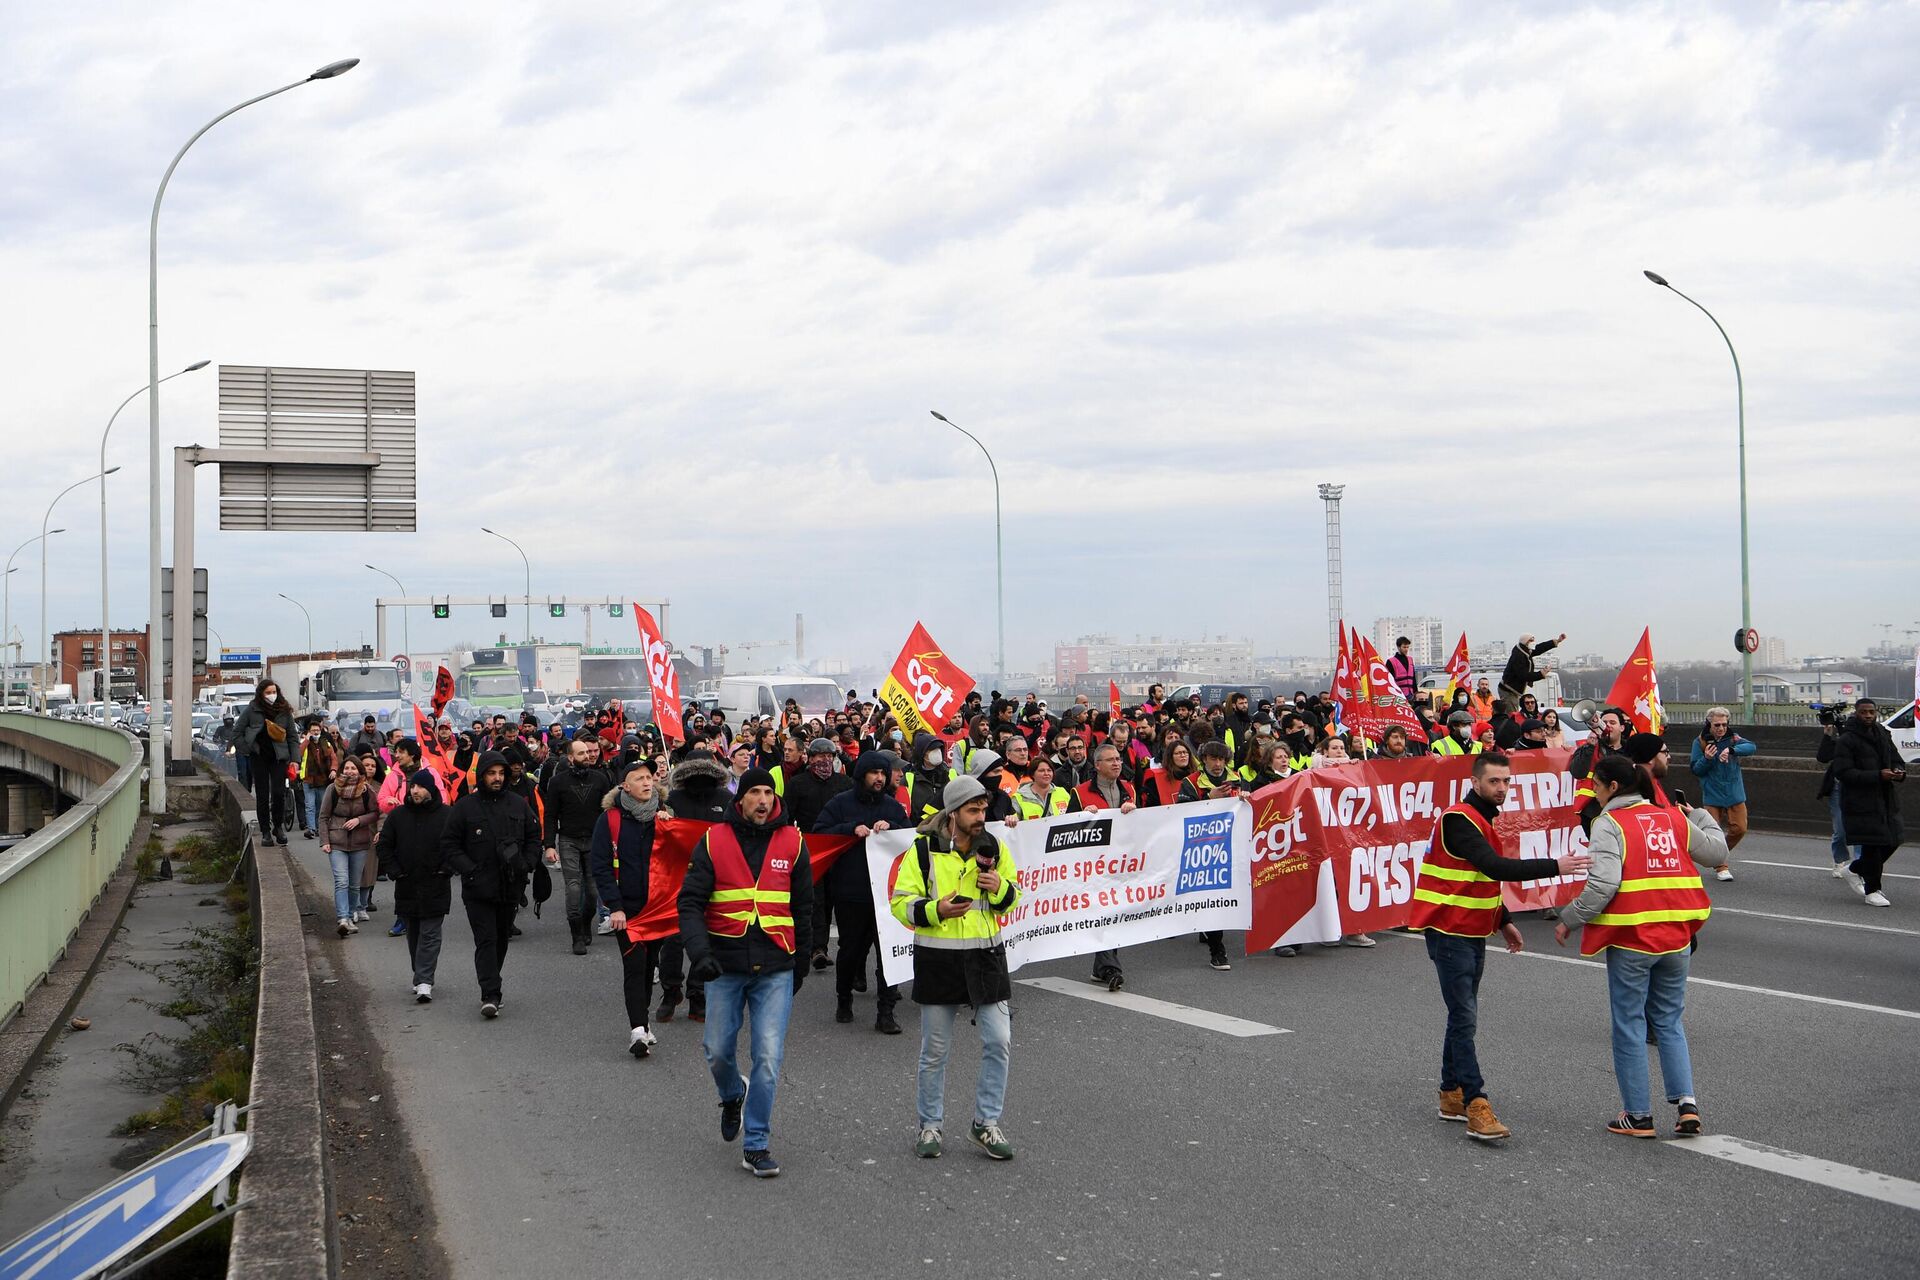 CGT unionists march with banners on March 17, 2023, a day after the French government pushed a pensions reform through parliament without a vote. - Sputnik International, 1920, 17.03.2023